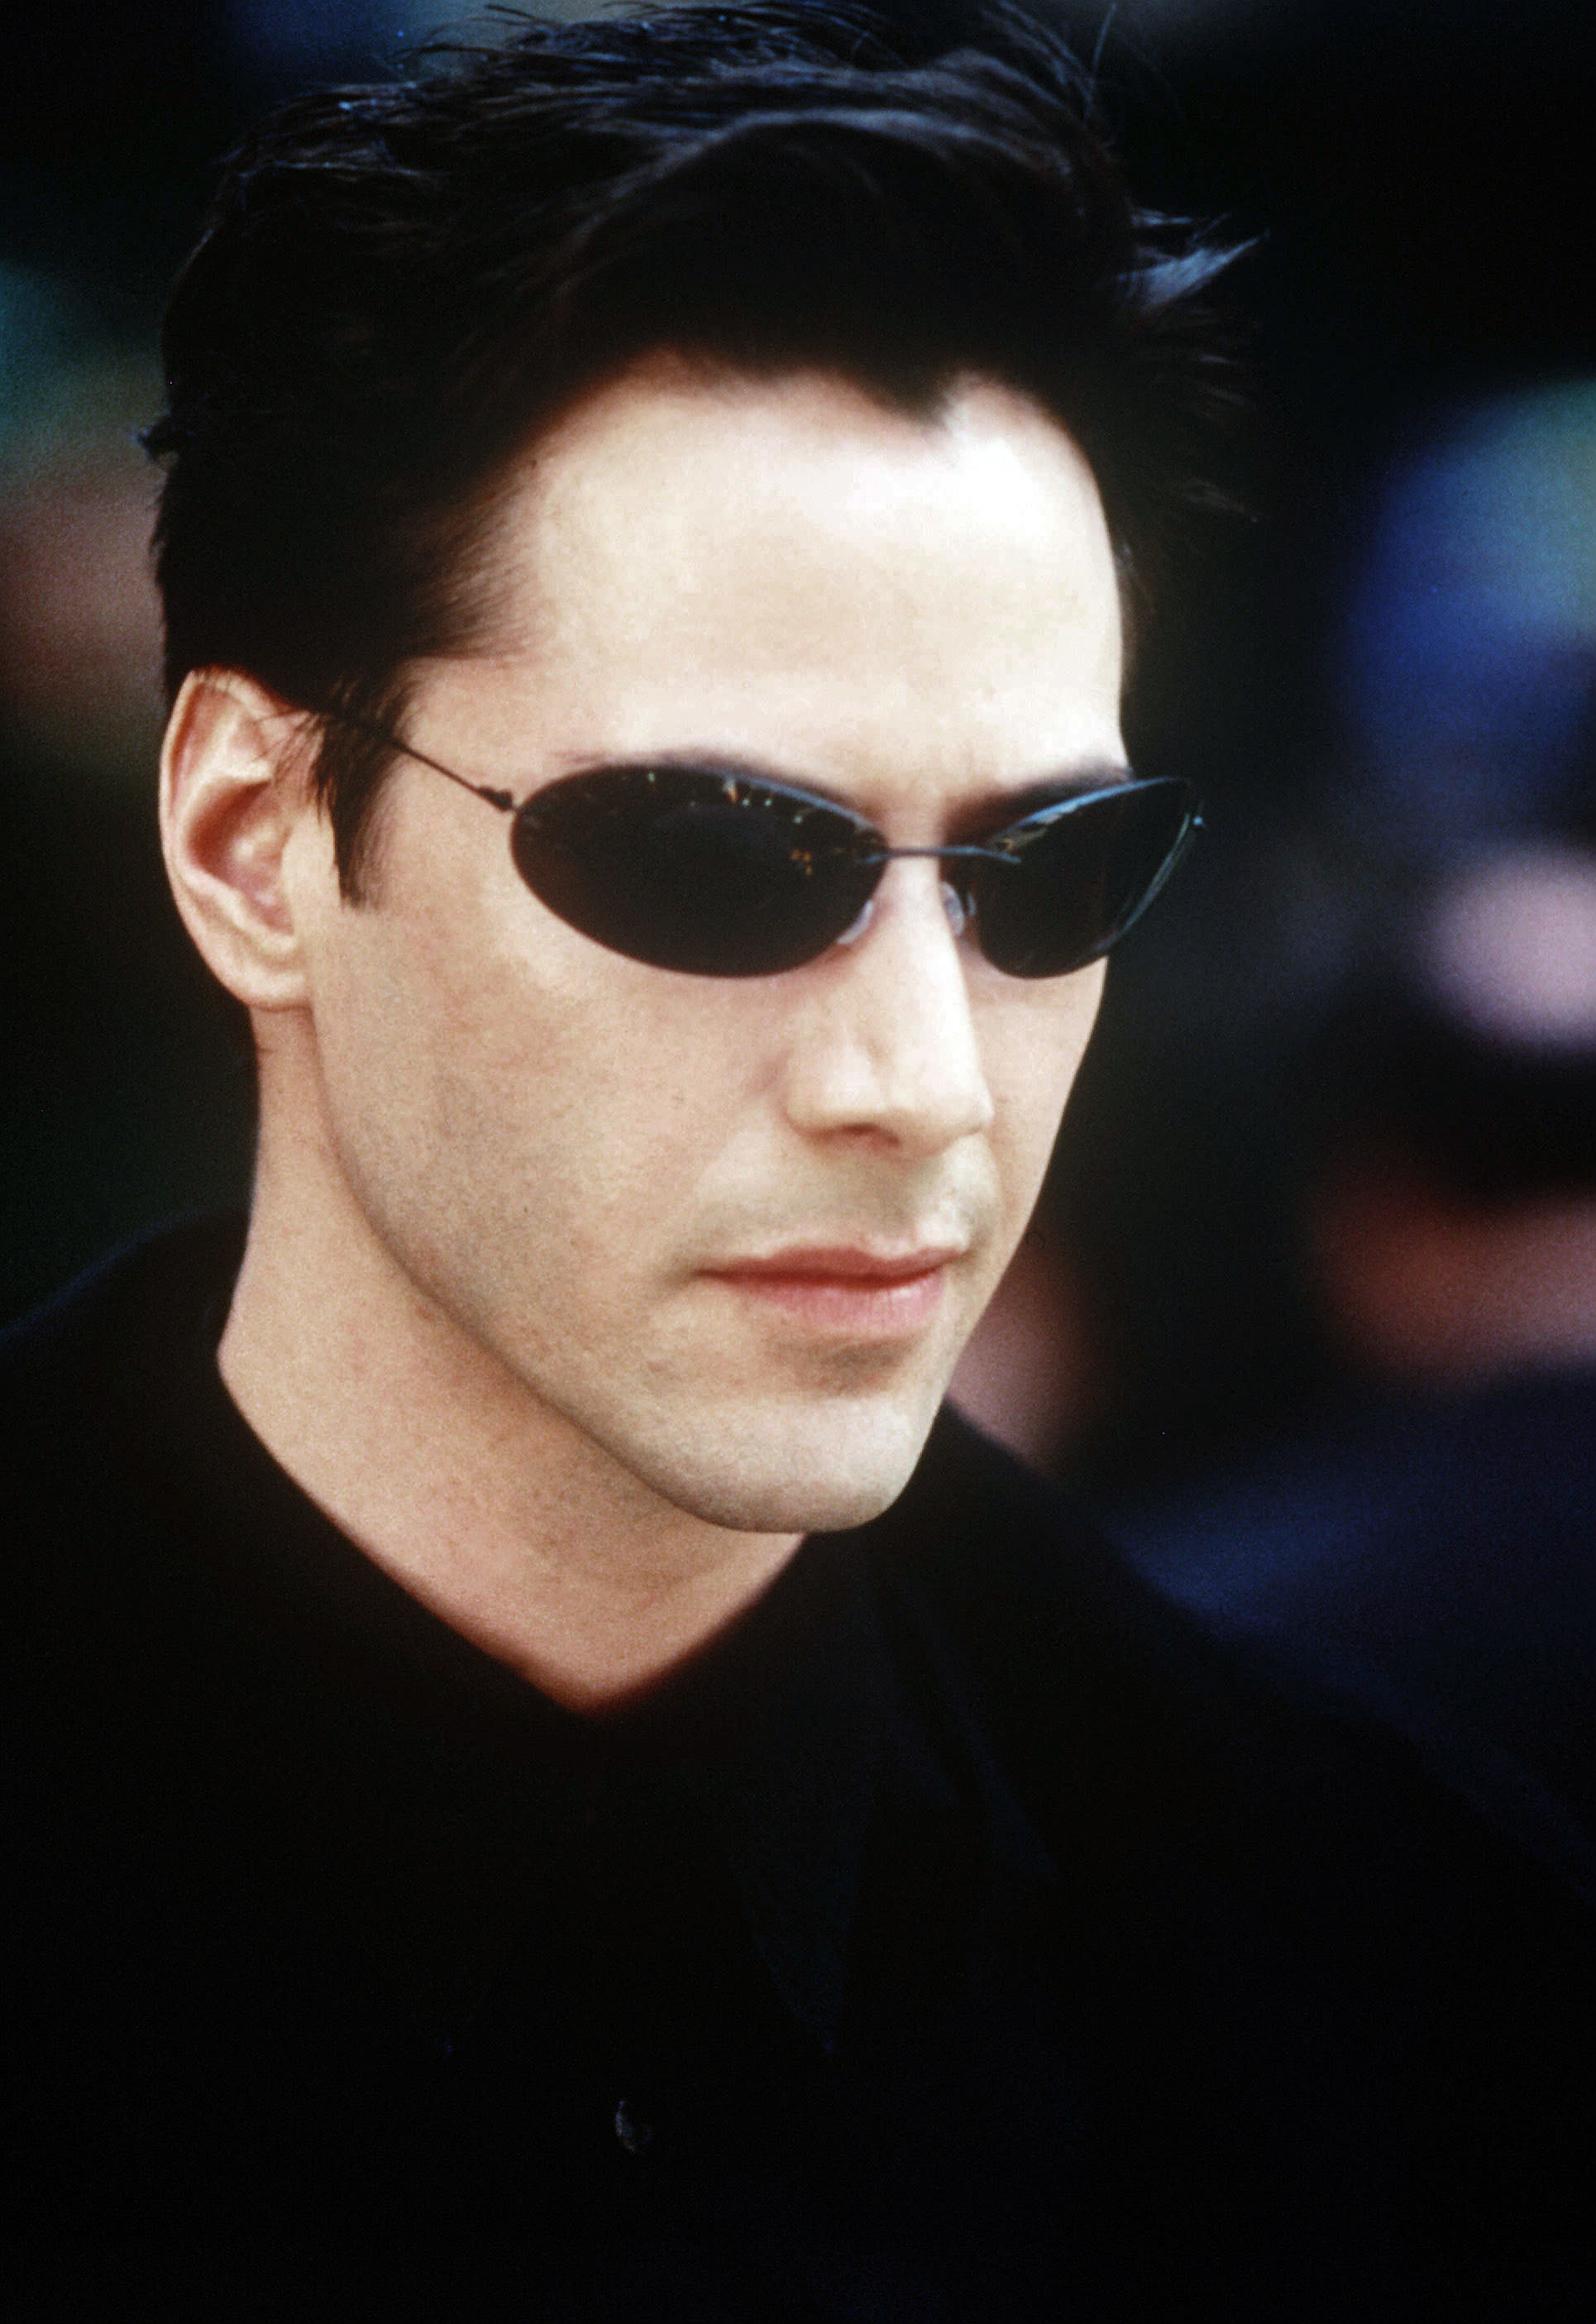 Keanu Reeves' life and career in photos